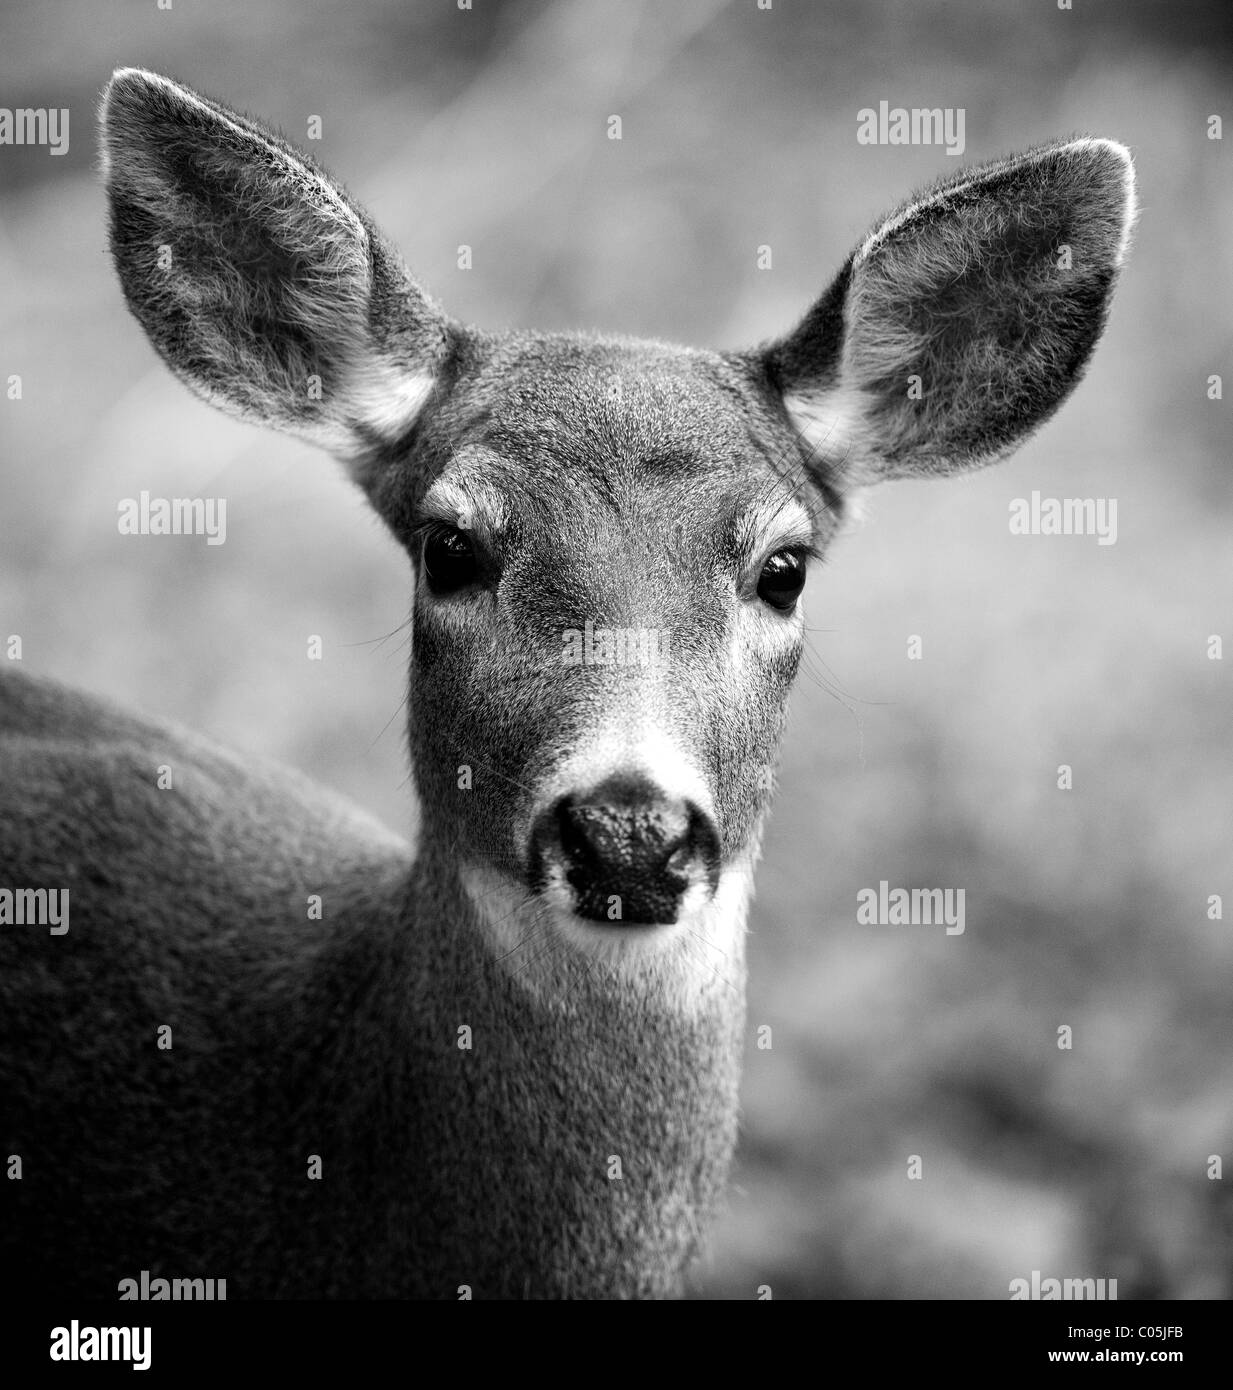 'Nord Ameriacan Blacktail deer del Nord Ovest del Pacifico". Foto Stock